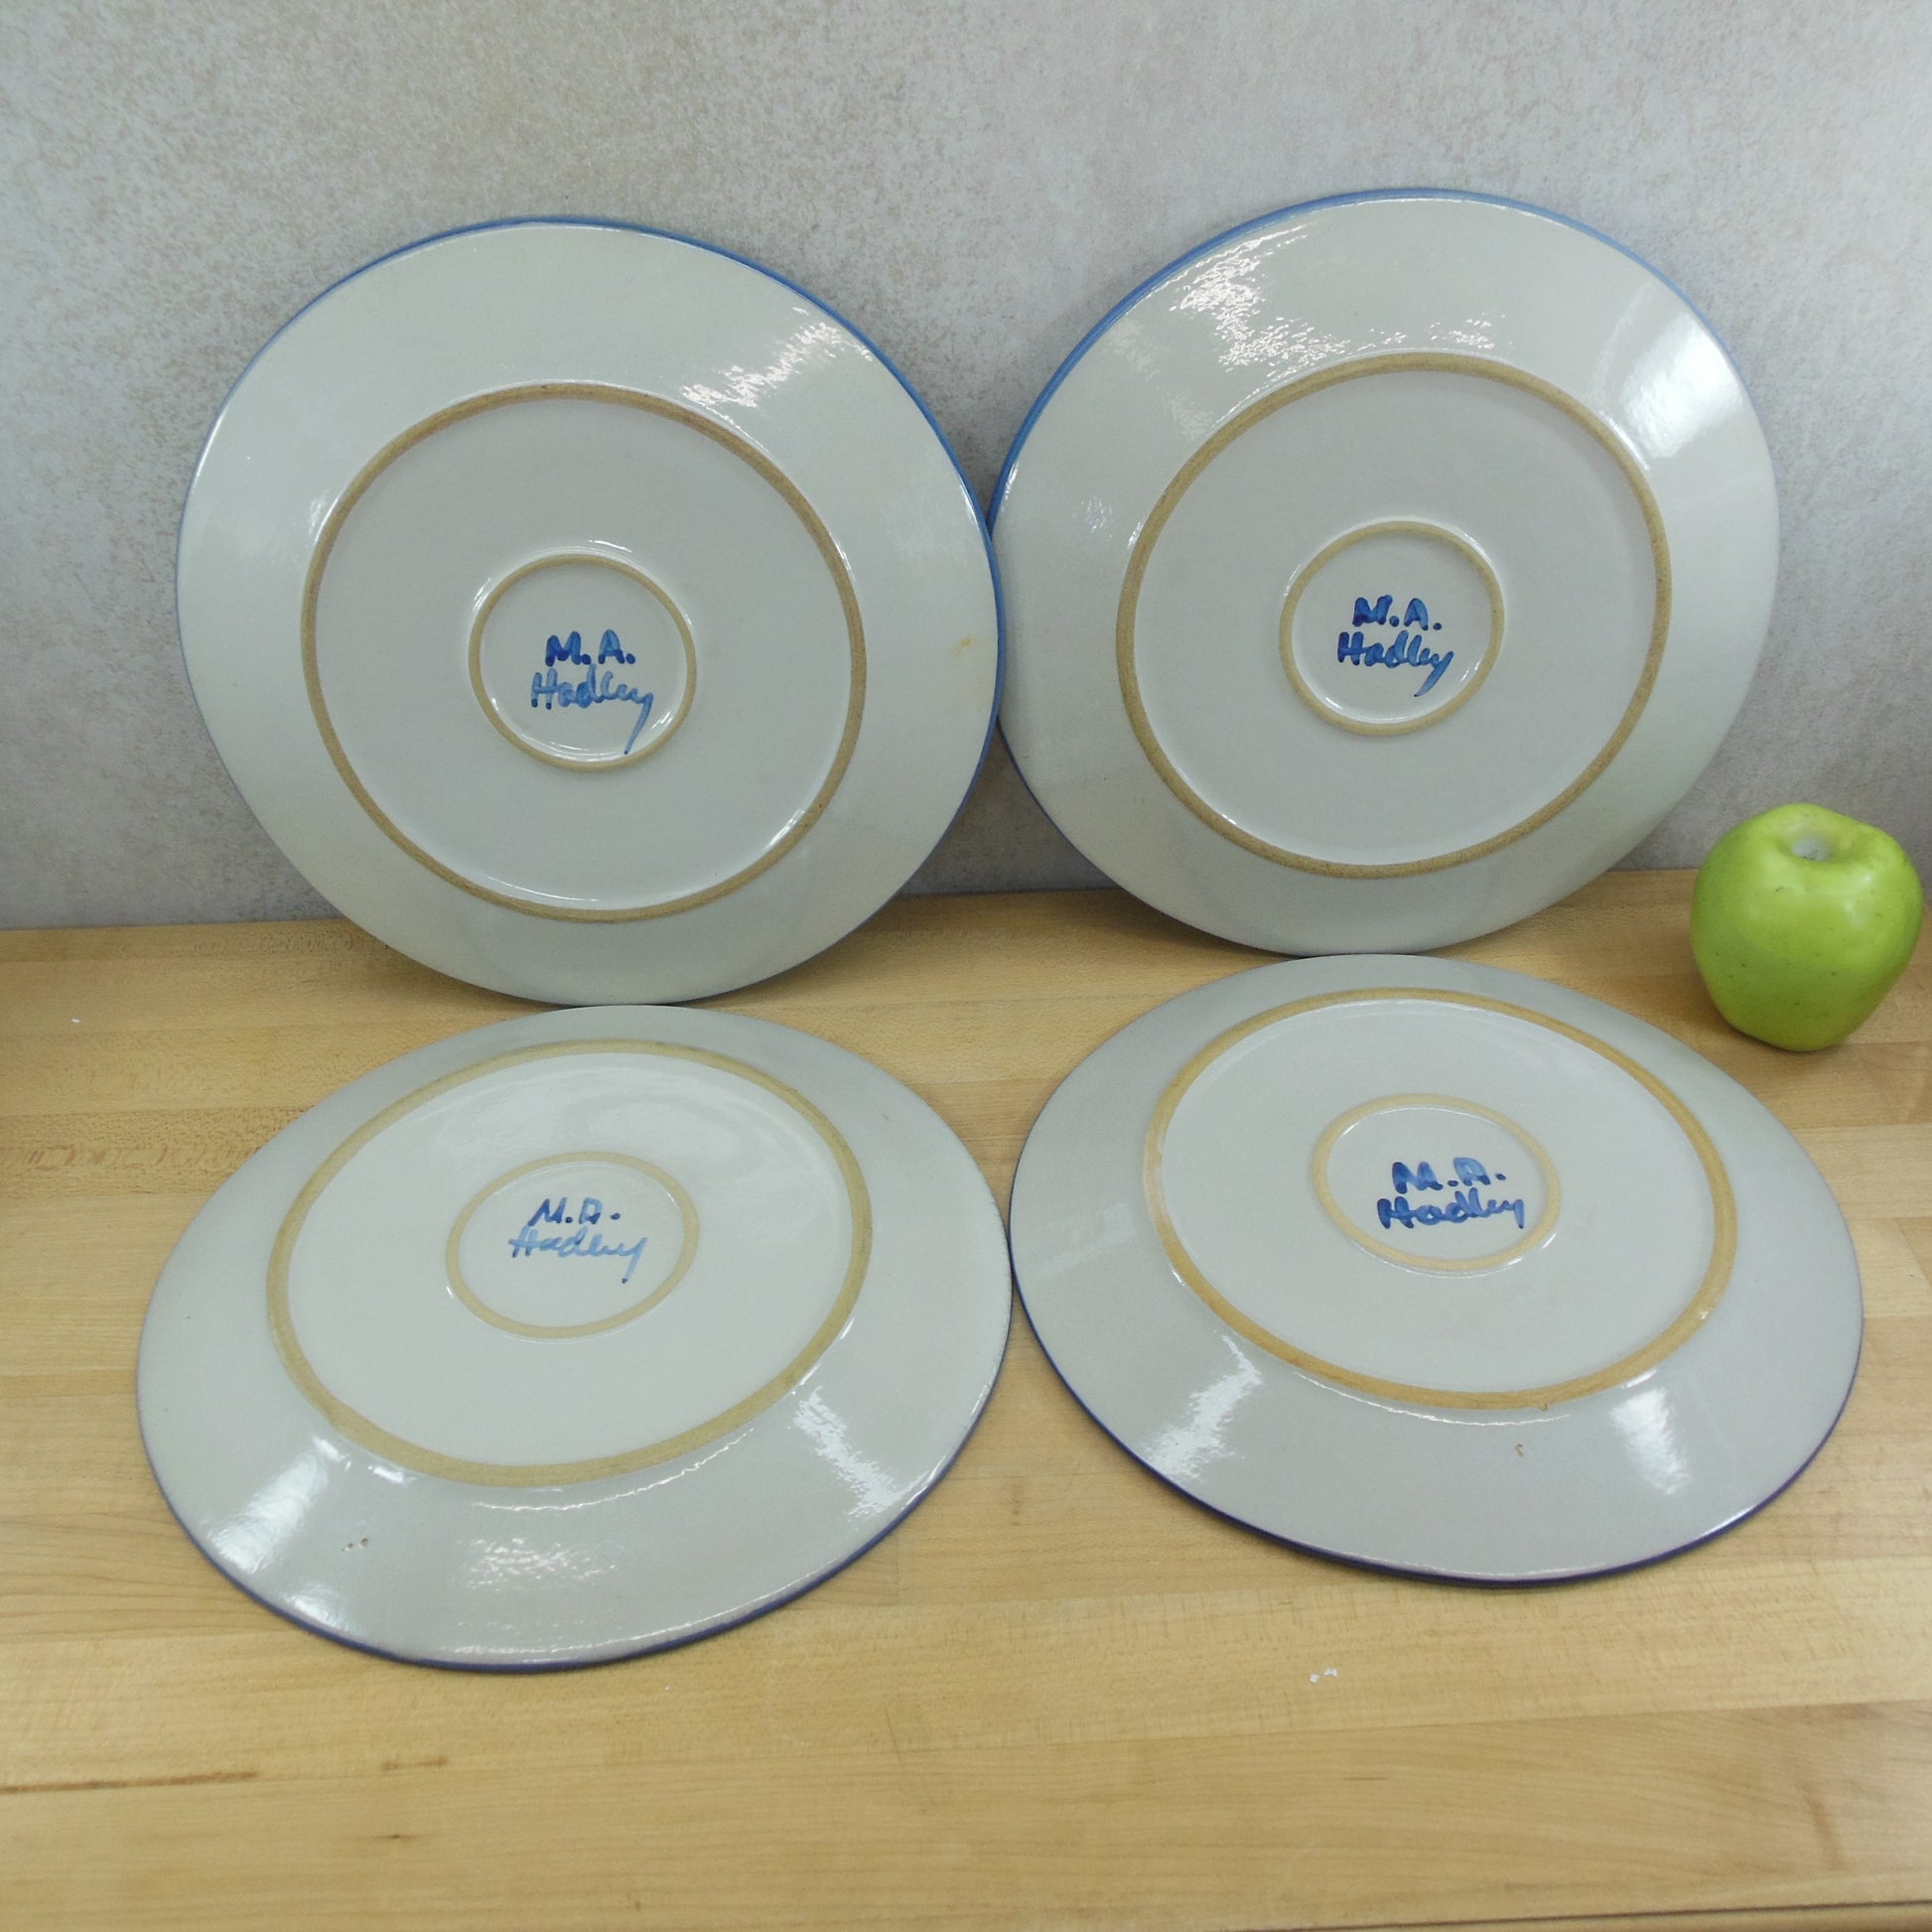 M.A. Hadley Pottery 4 Set Dinner Plates 11" House Chicken Farmer Man Woman - Discounted signed